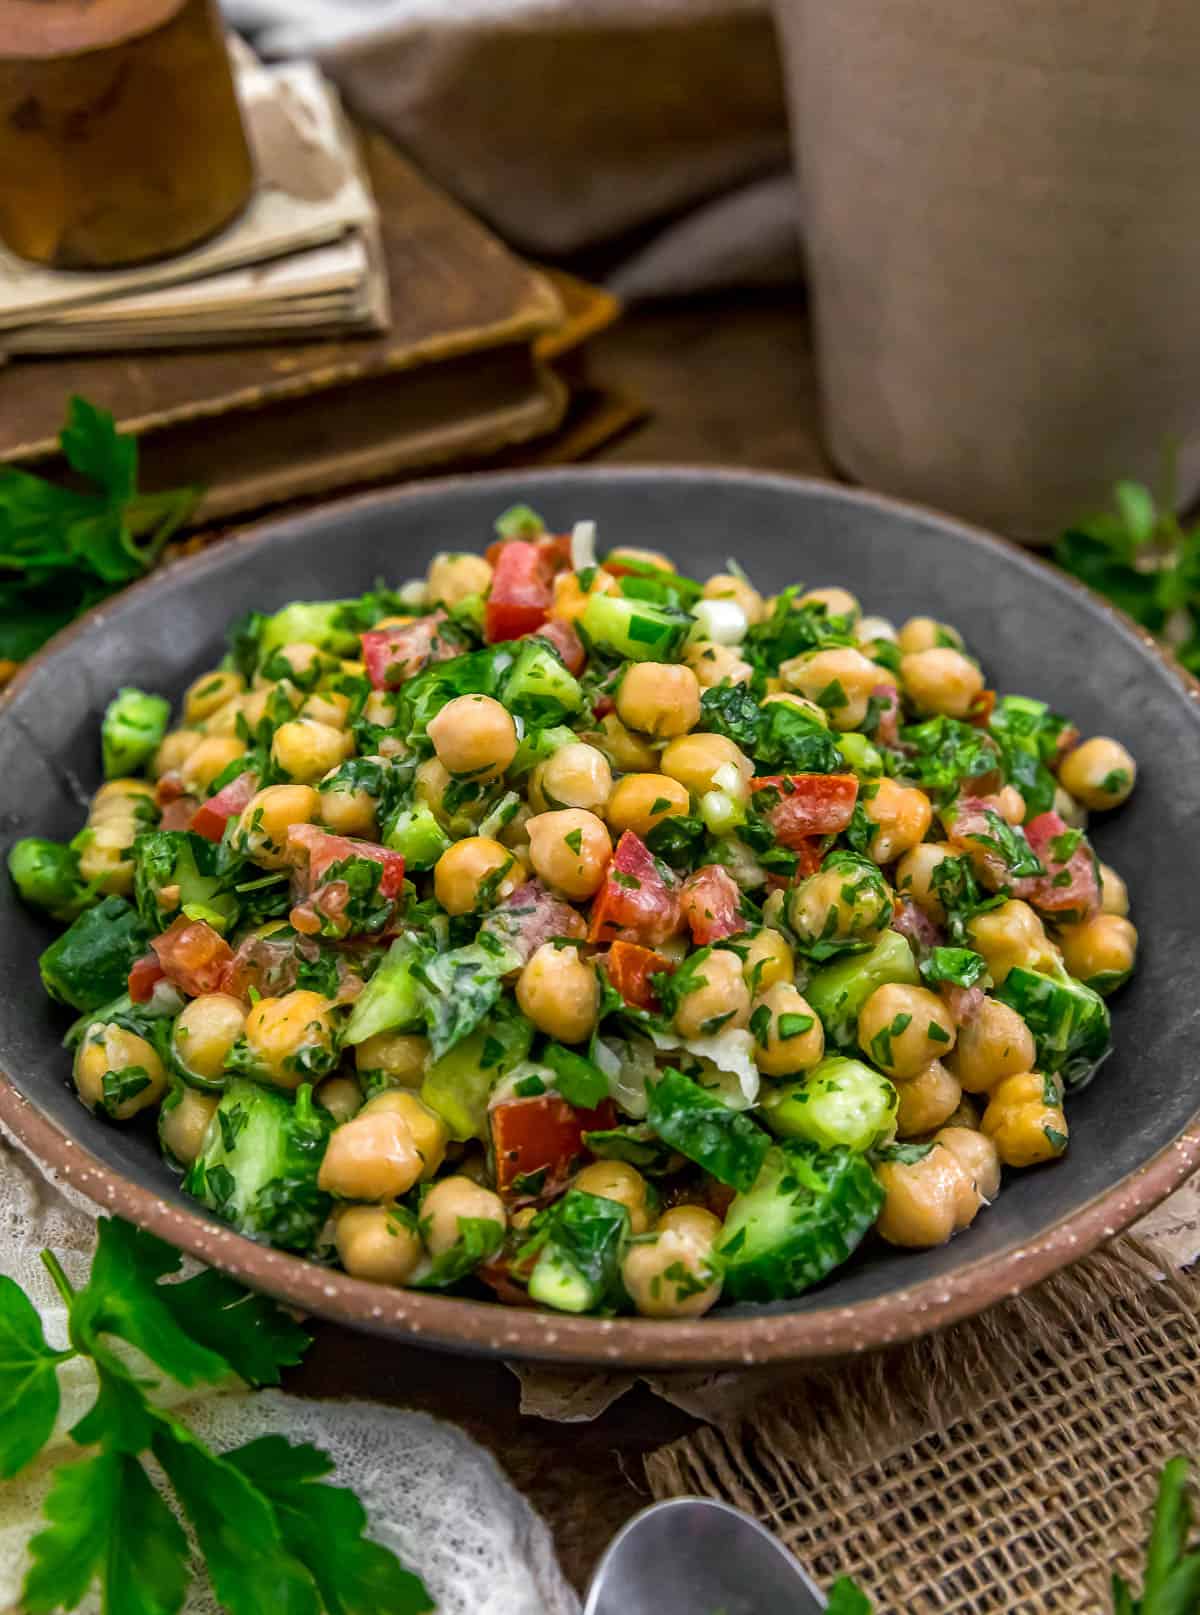 Oil Free Tabouli Pasta Salad with chickpeas